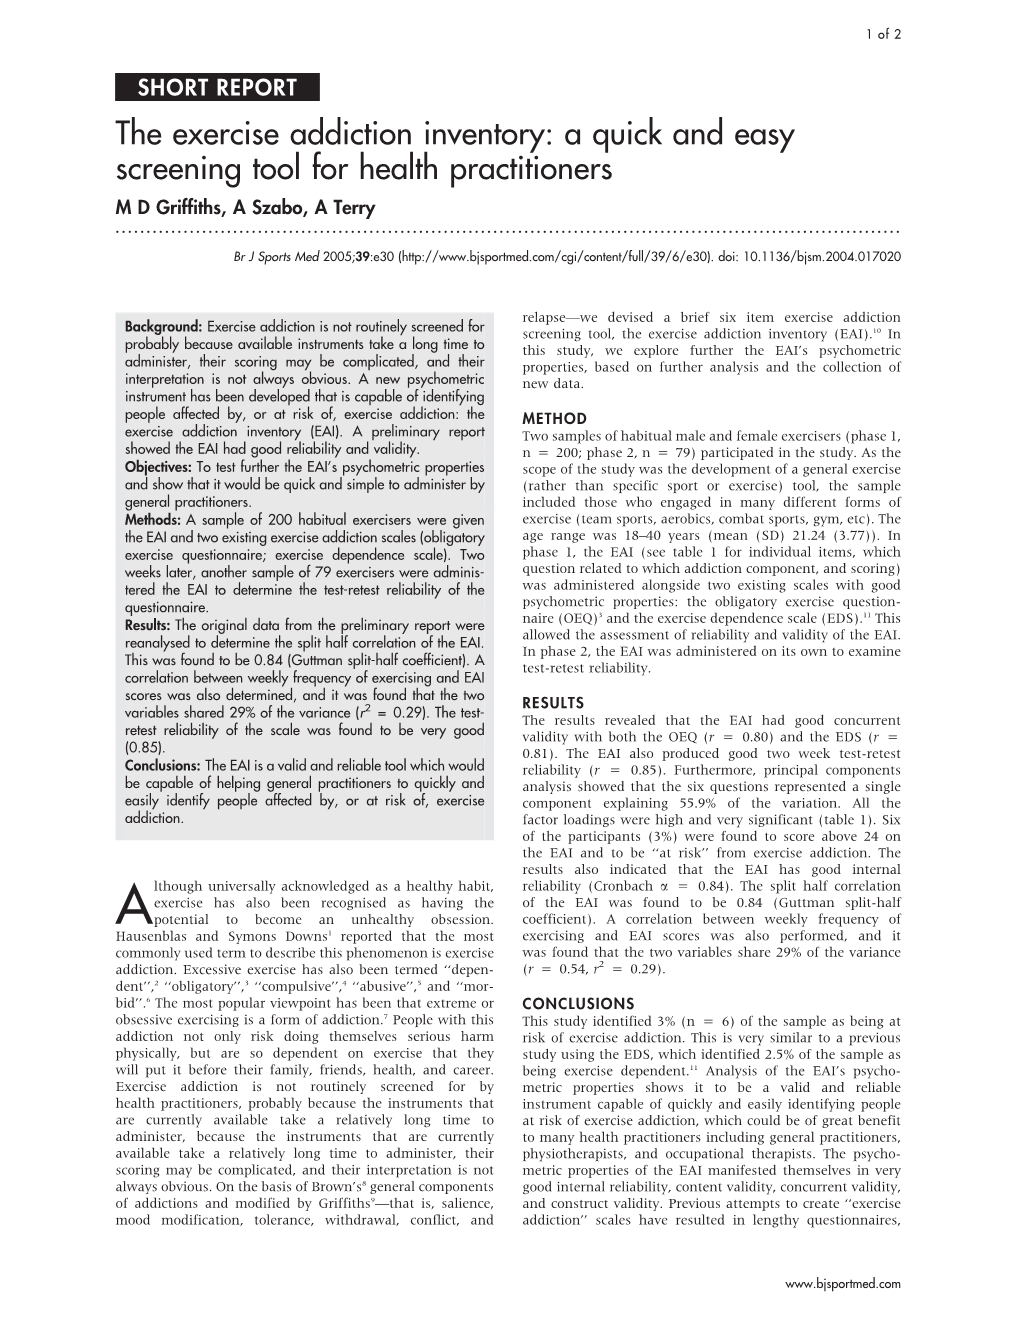 The Exercise Addiction Inventory: a Quick and Easy Screening Tool for Health Practitioners M D Griffiths, a Szabo, a Terry